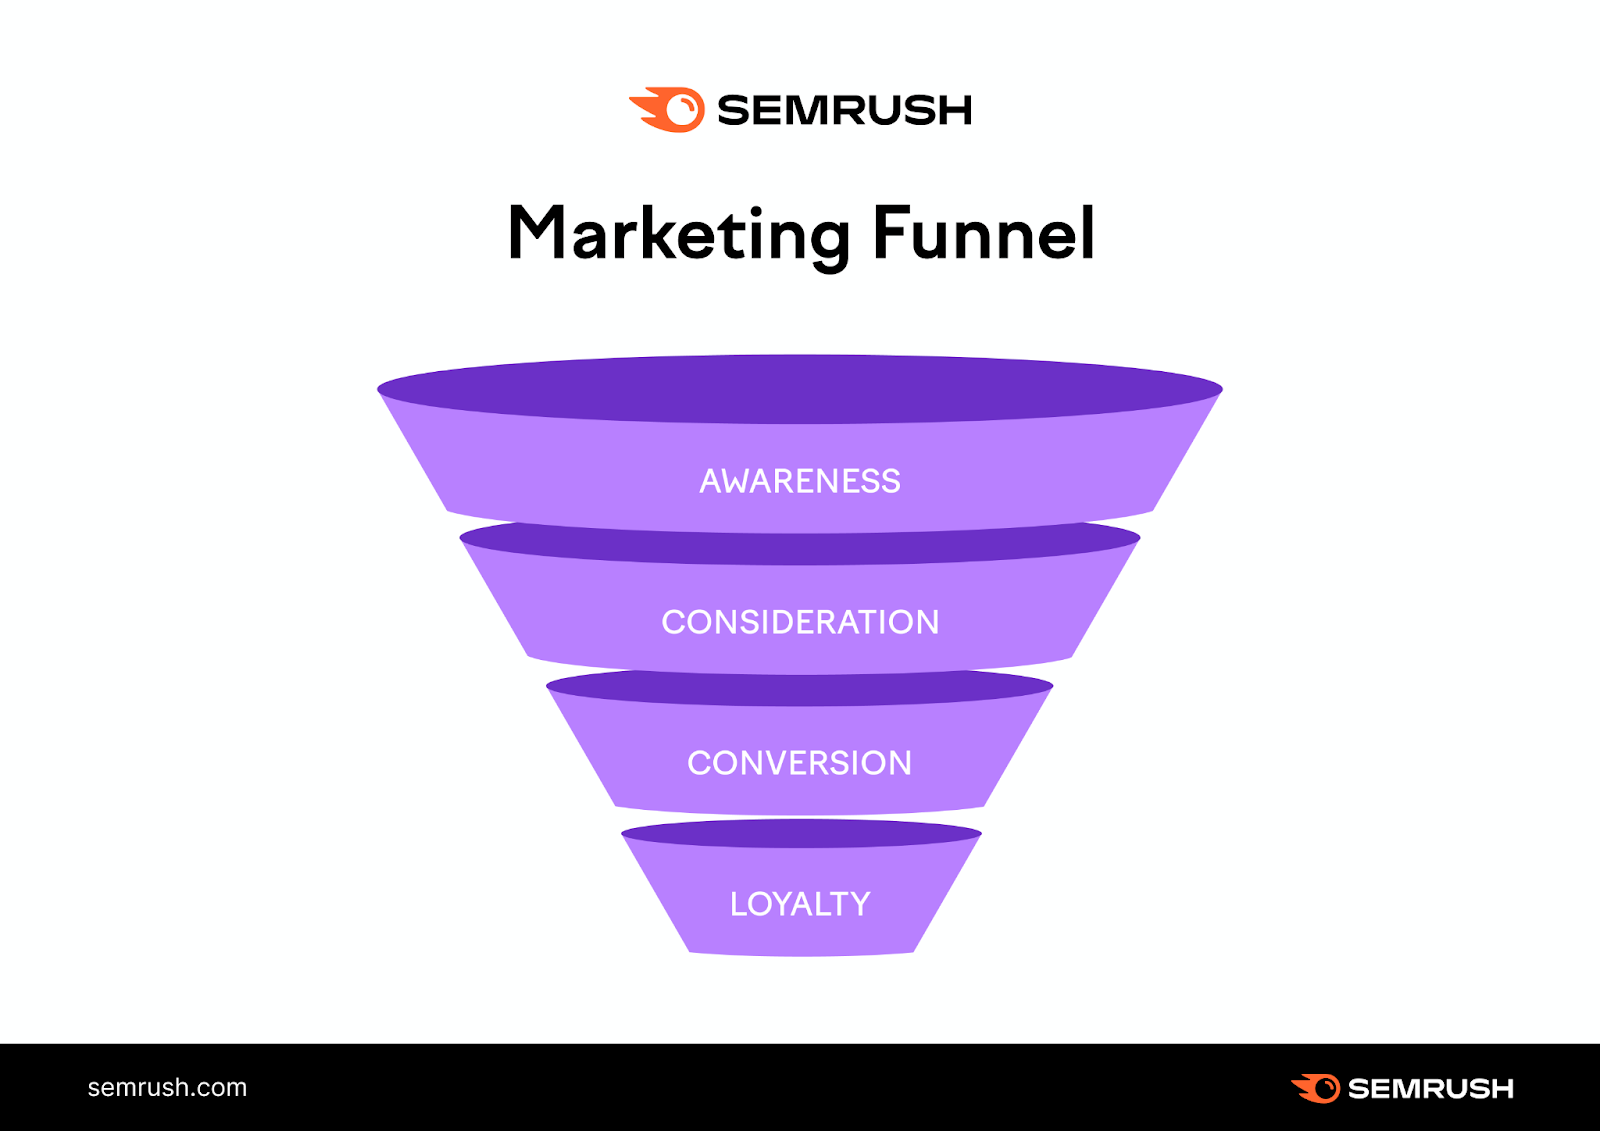 A visual of the marketing funnel, with awareness, consideration, conversion, and loyalty stages